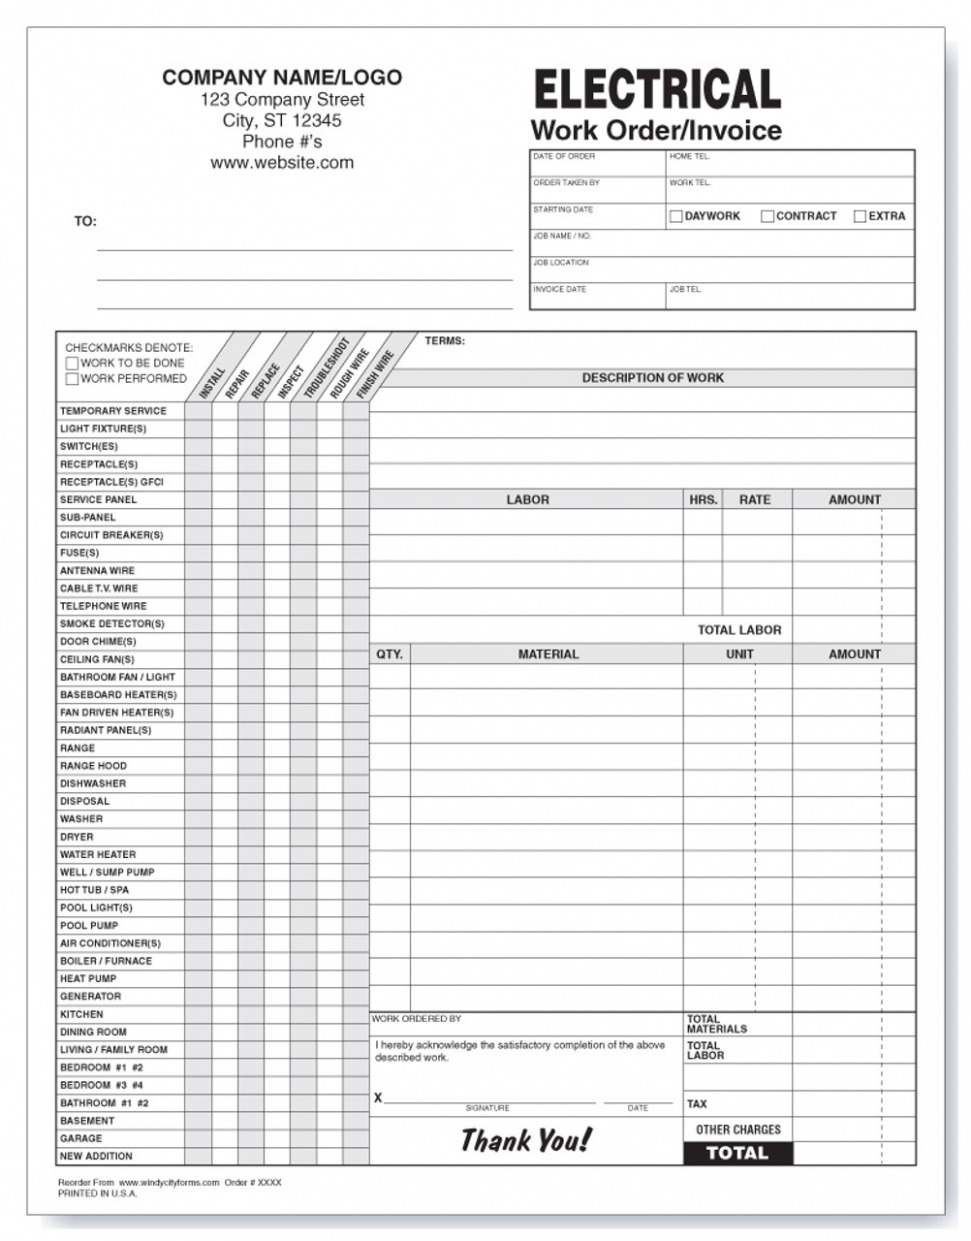 Editable Electrical Work Order Invoice Template Word